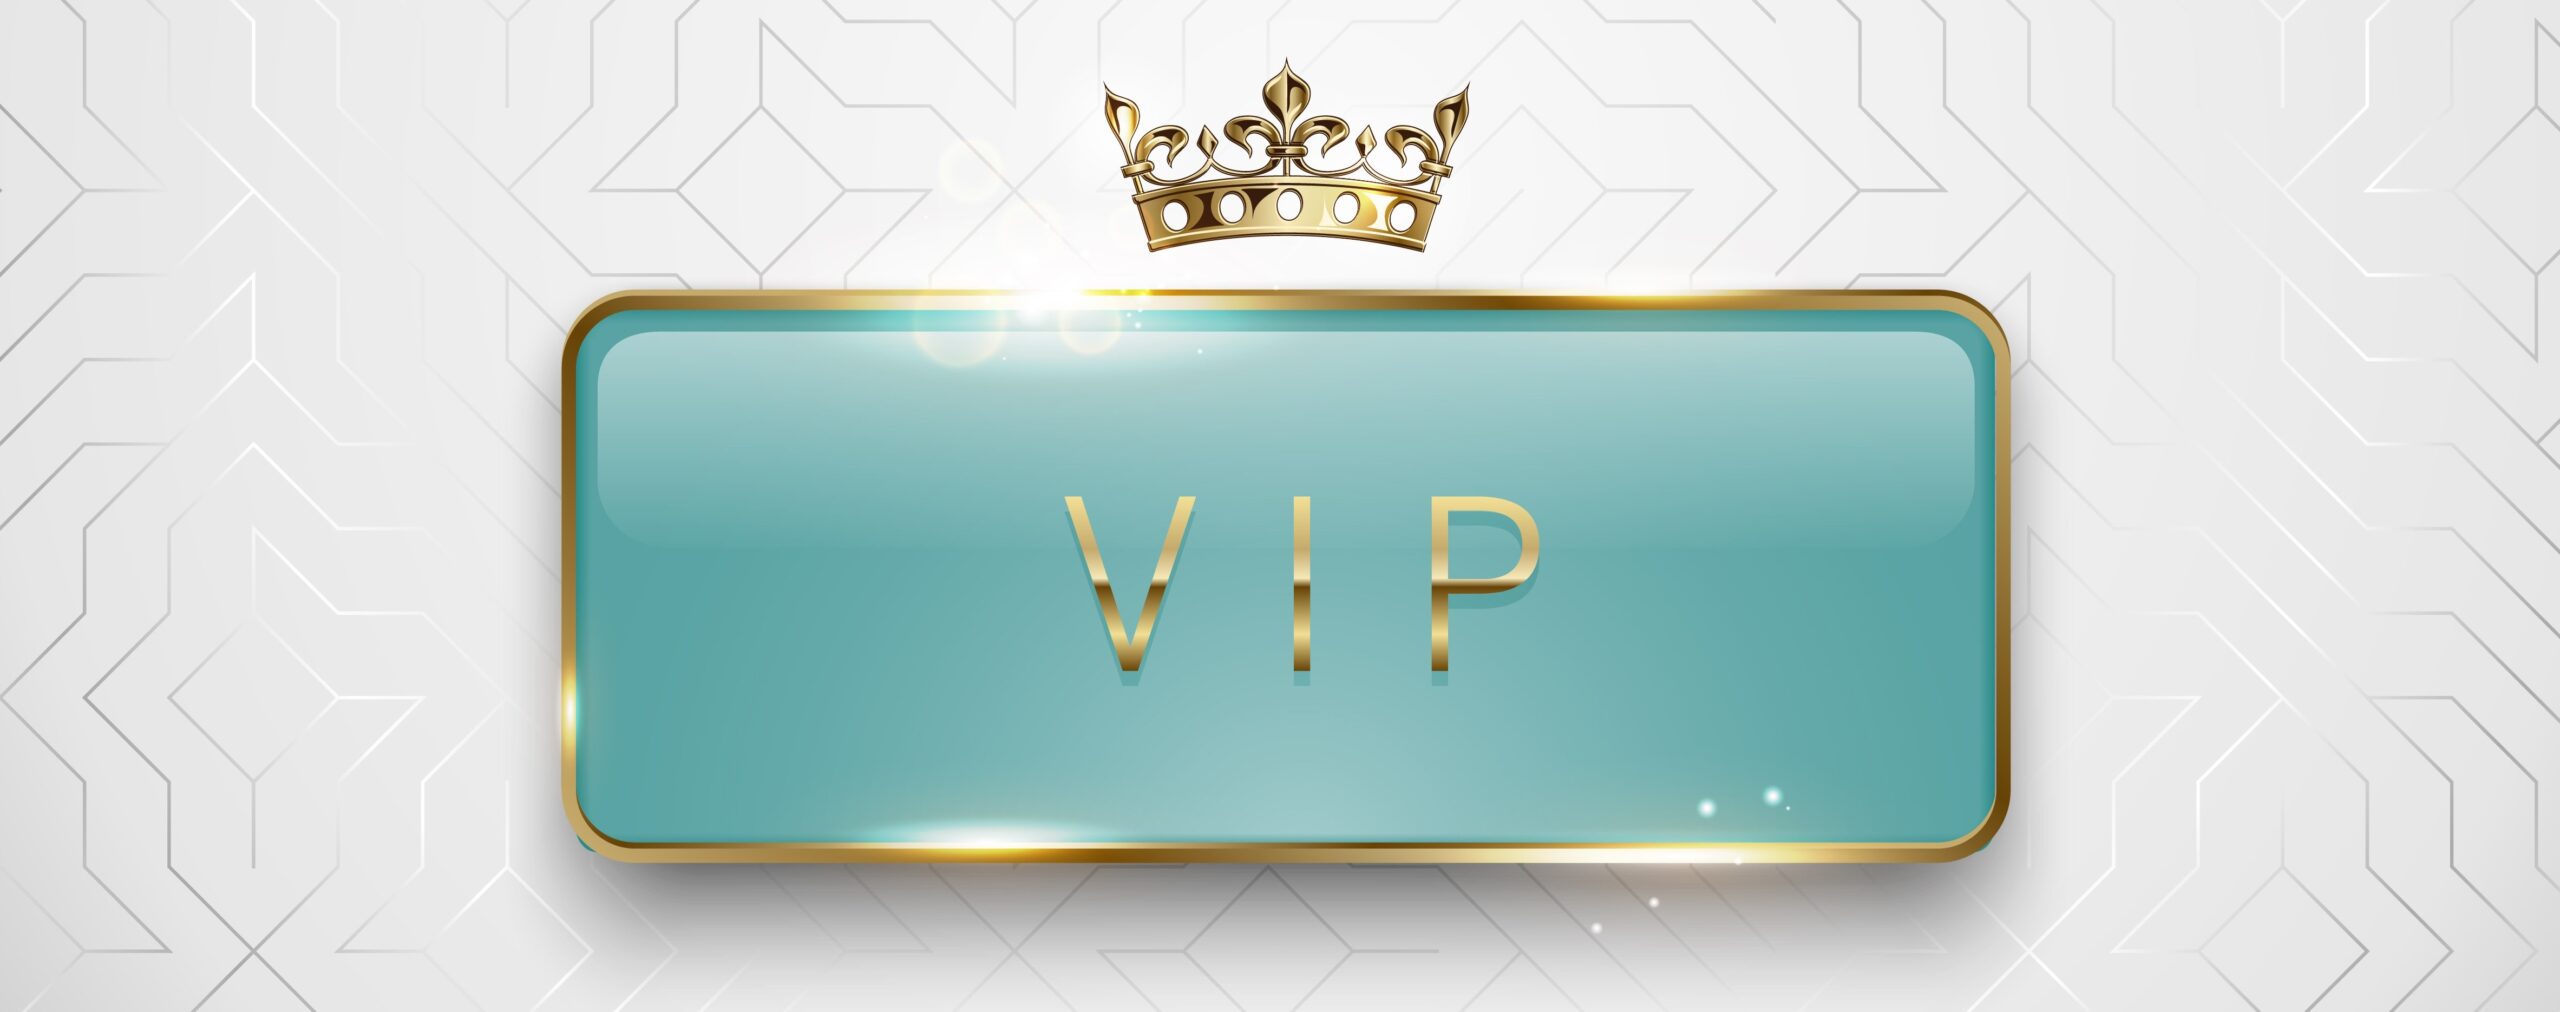 Gold, Silver and VIP: Free and paid loyalty tiers (Part 1)